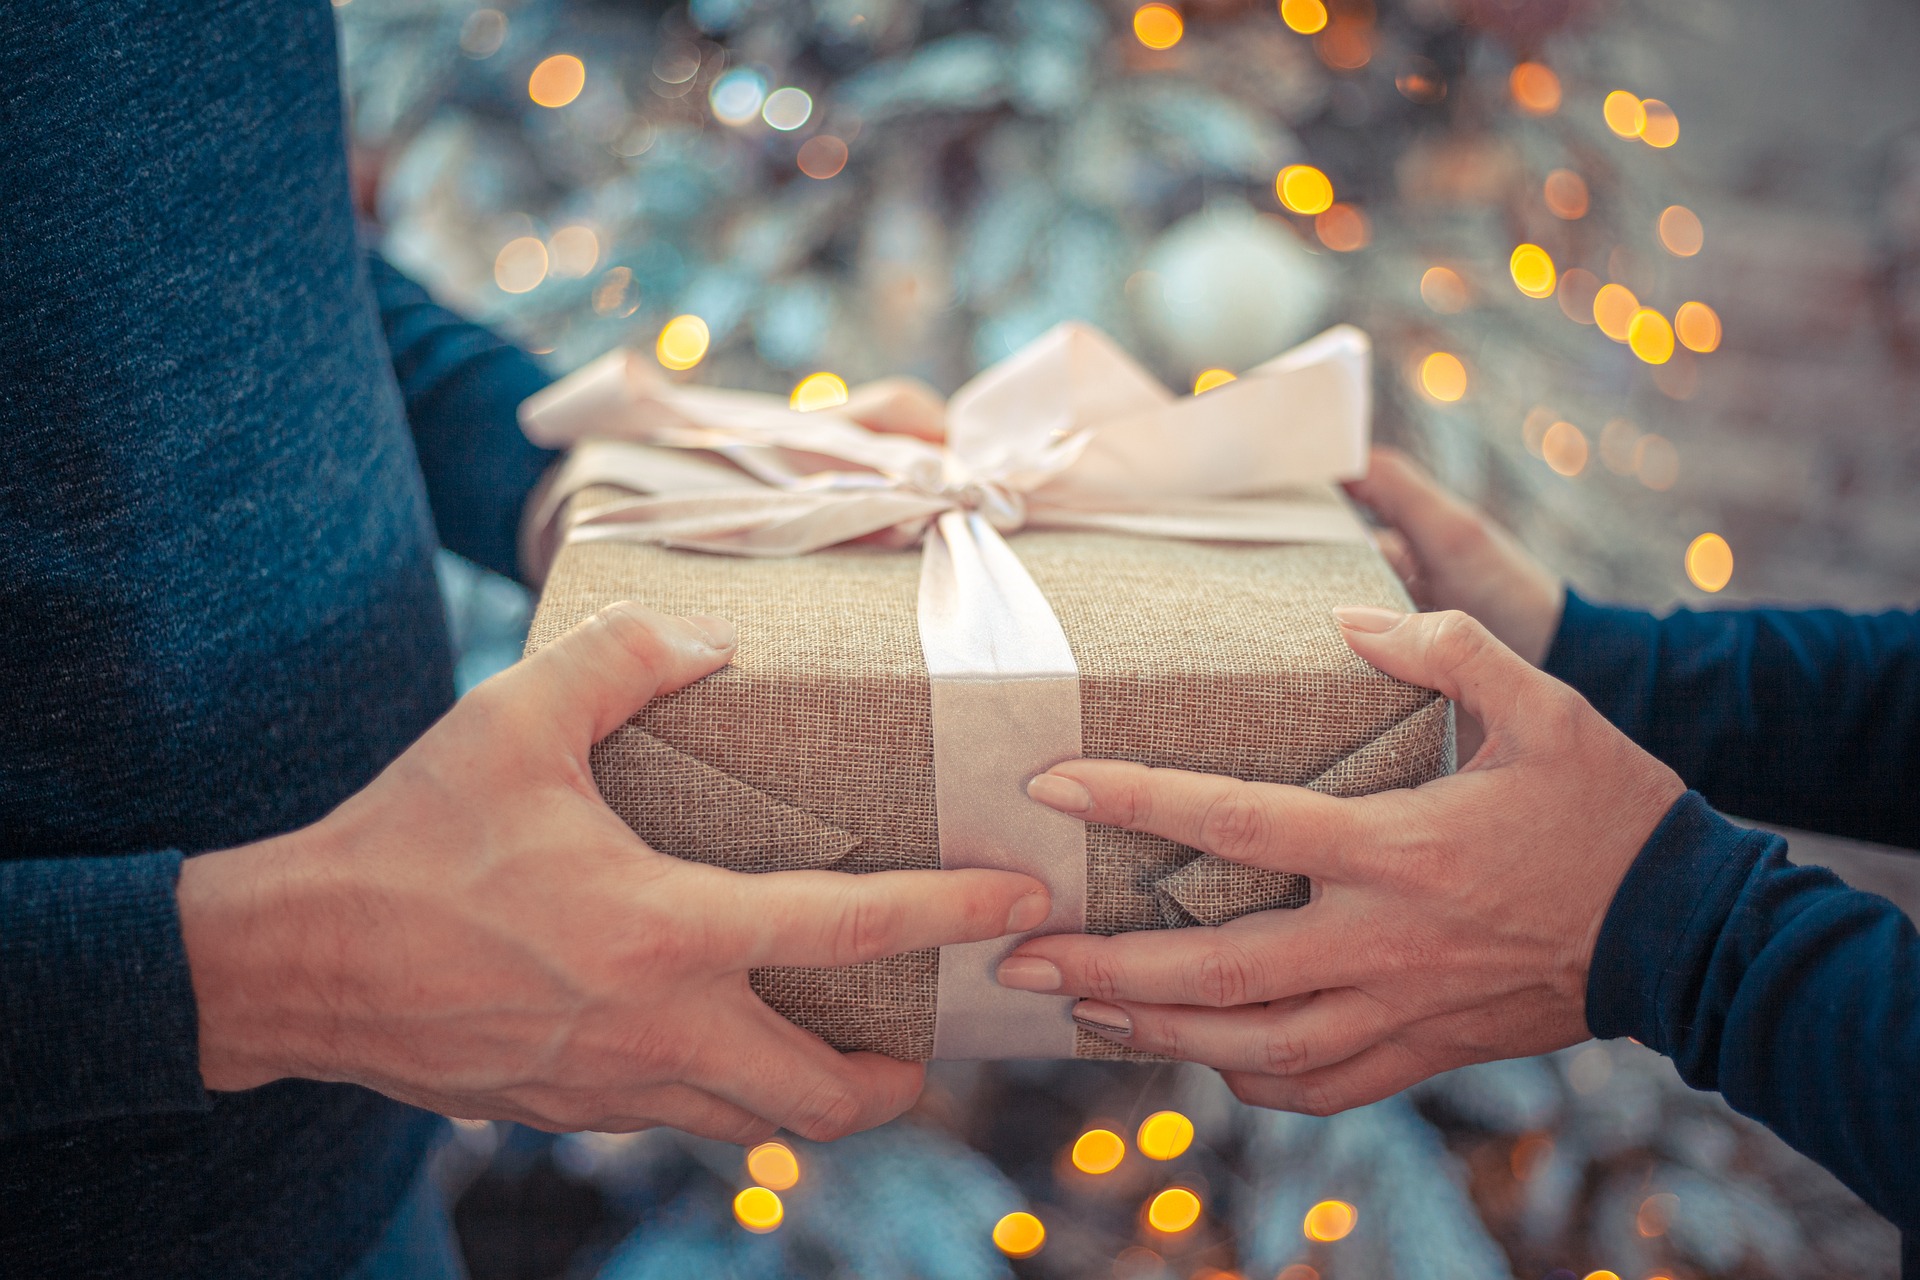 Two people passing a wrapped gift between them; our Conveyancing Solicitors in Lytham discuss the pros and cons of gifting property to your children during your lifetime.